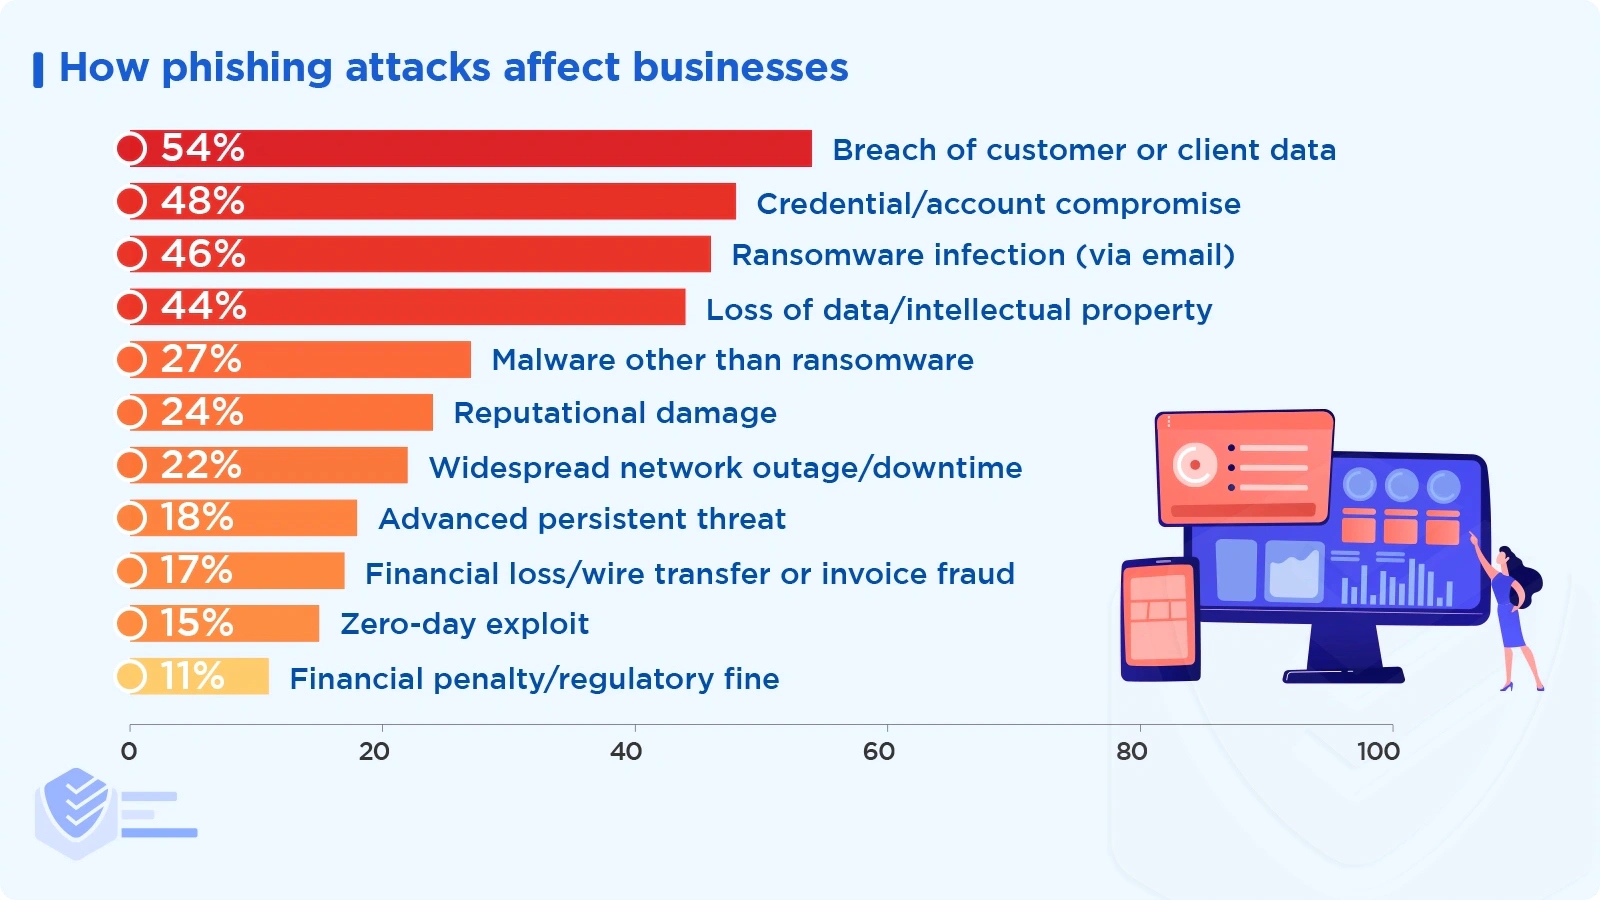 How phishing attacks affect businesses